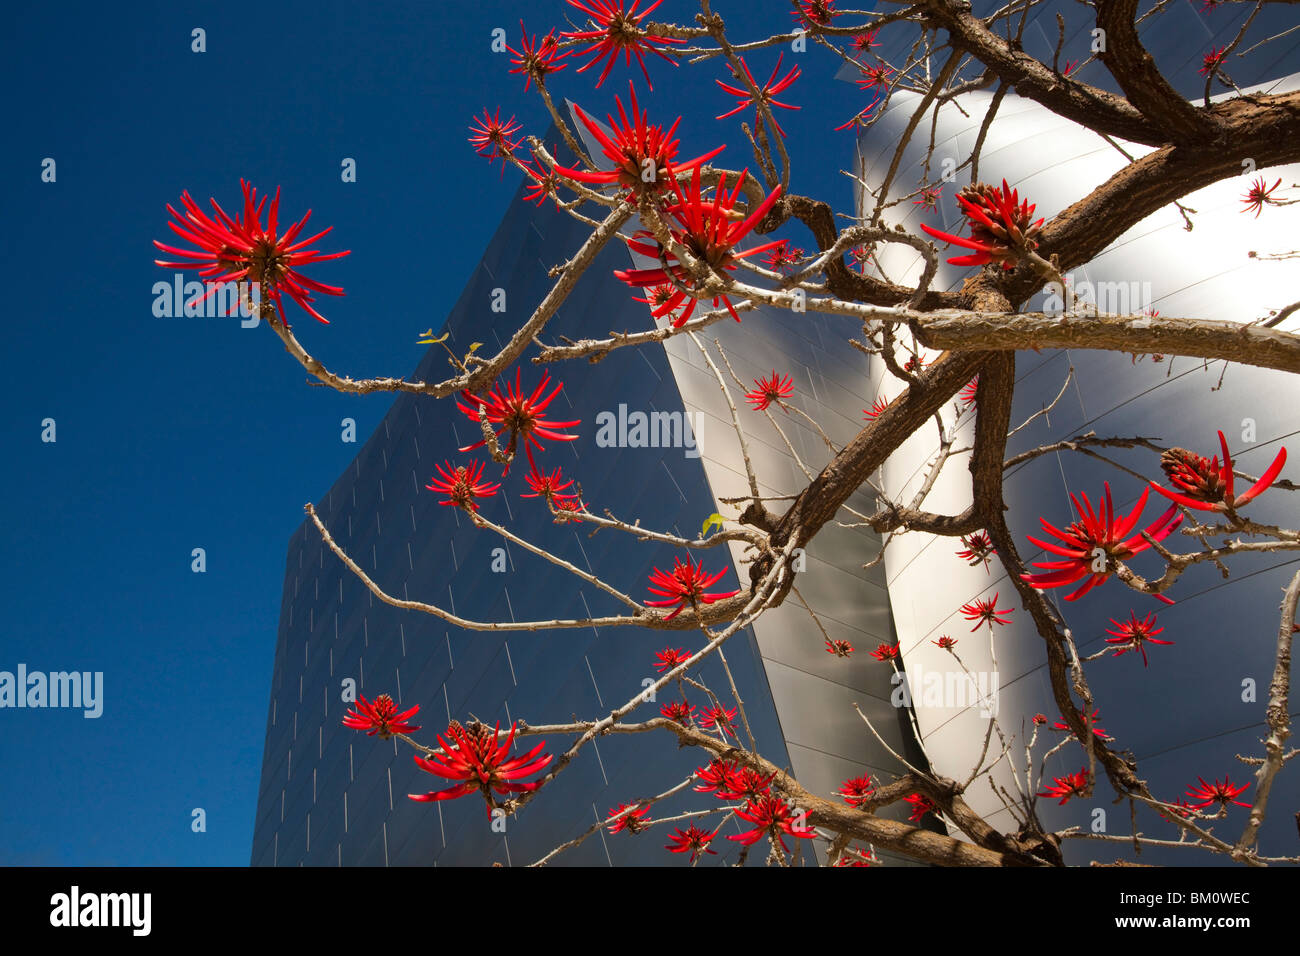 Coral Tree in Bloom, Walt Disney Concert Hall, Los Angeles , California, United States of America Stock Photo